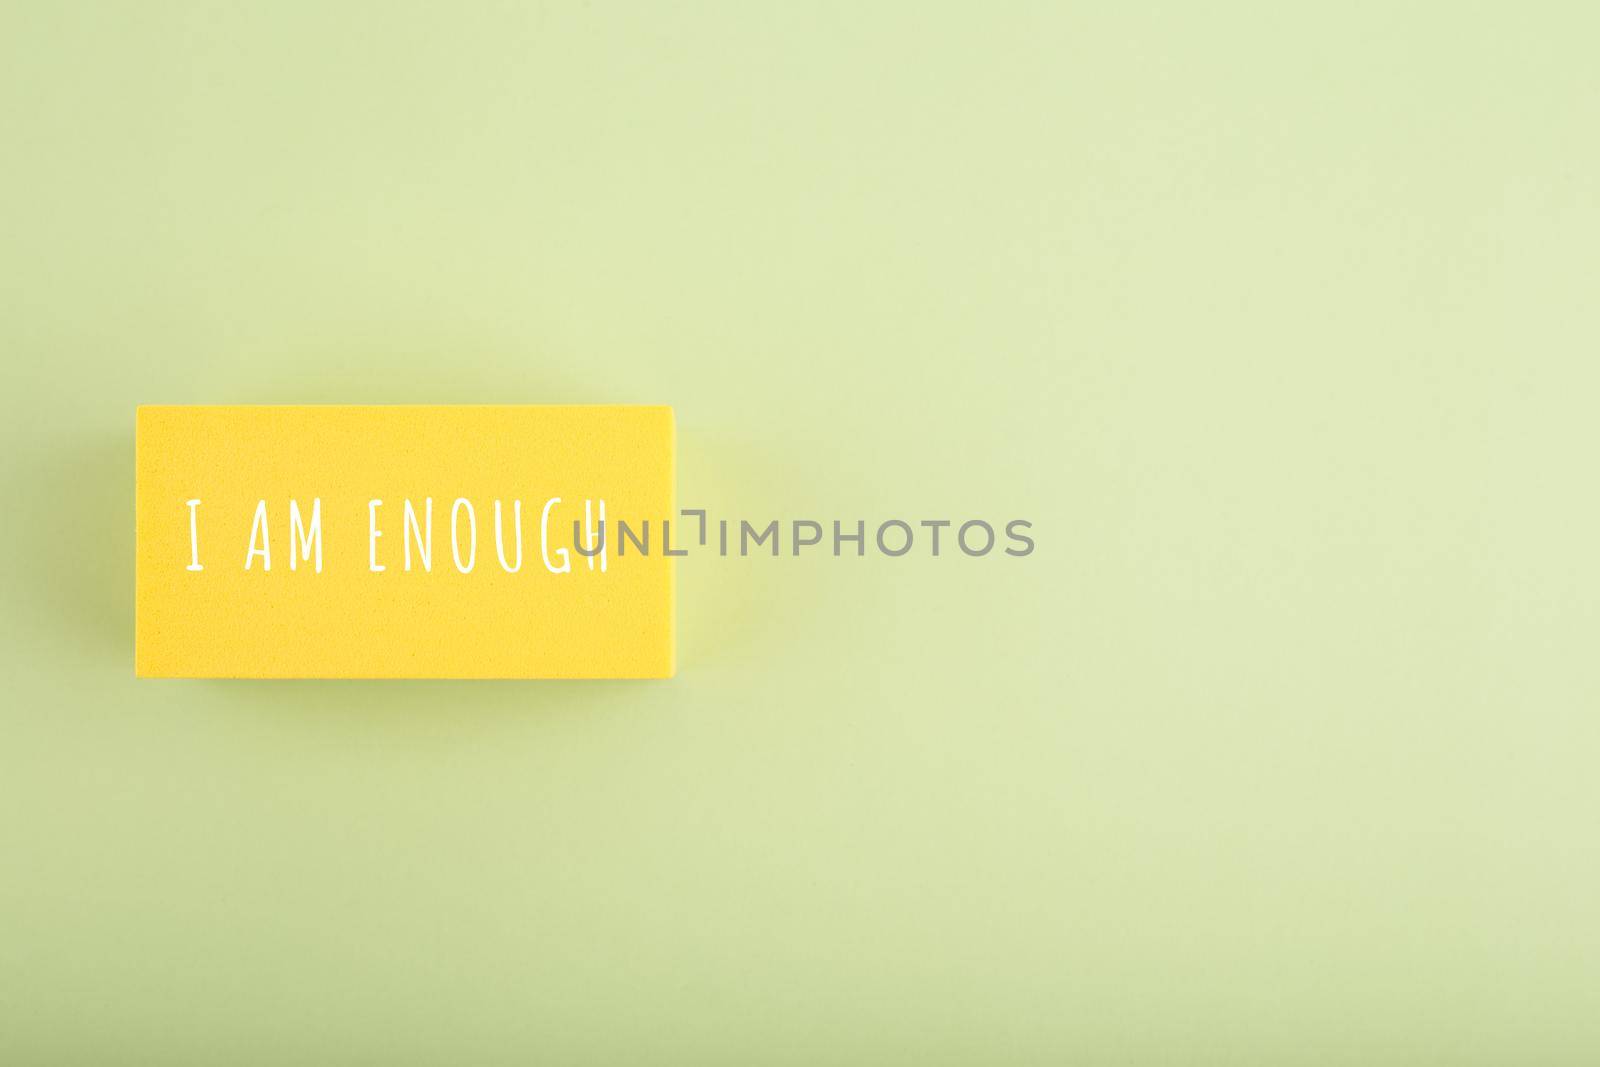 I am enough trendy minimal concept on bright green background. Lettering design, motivation quote, self acceptance and mental health